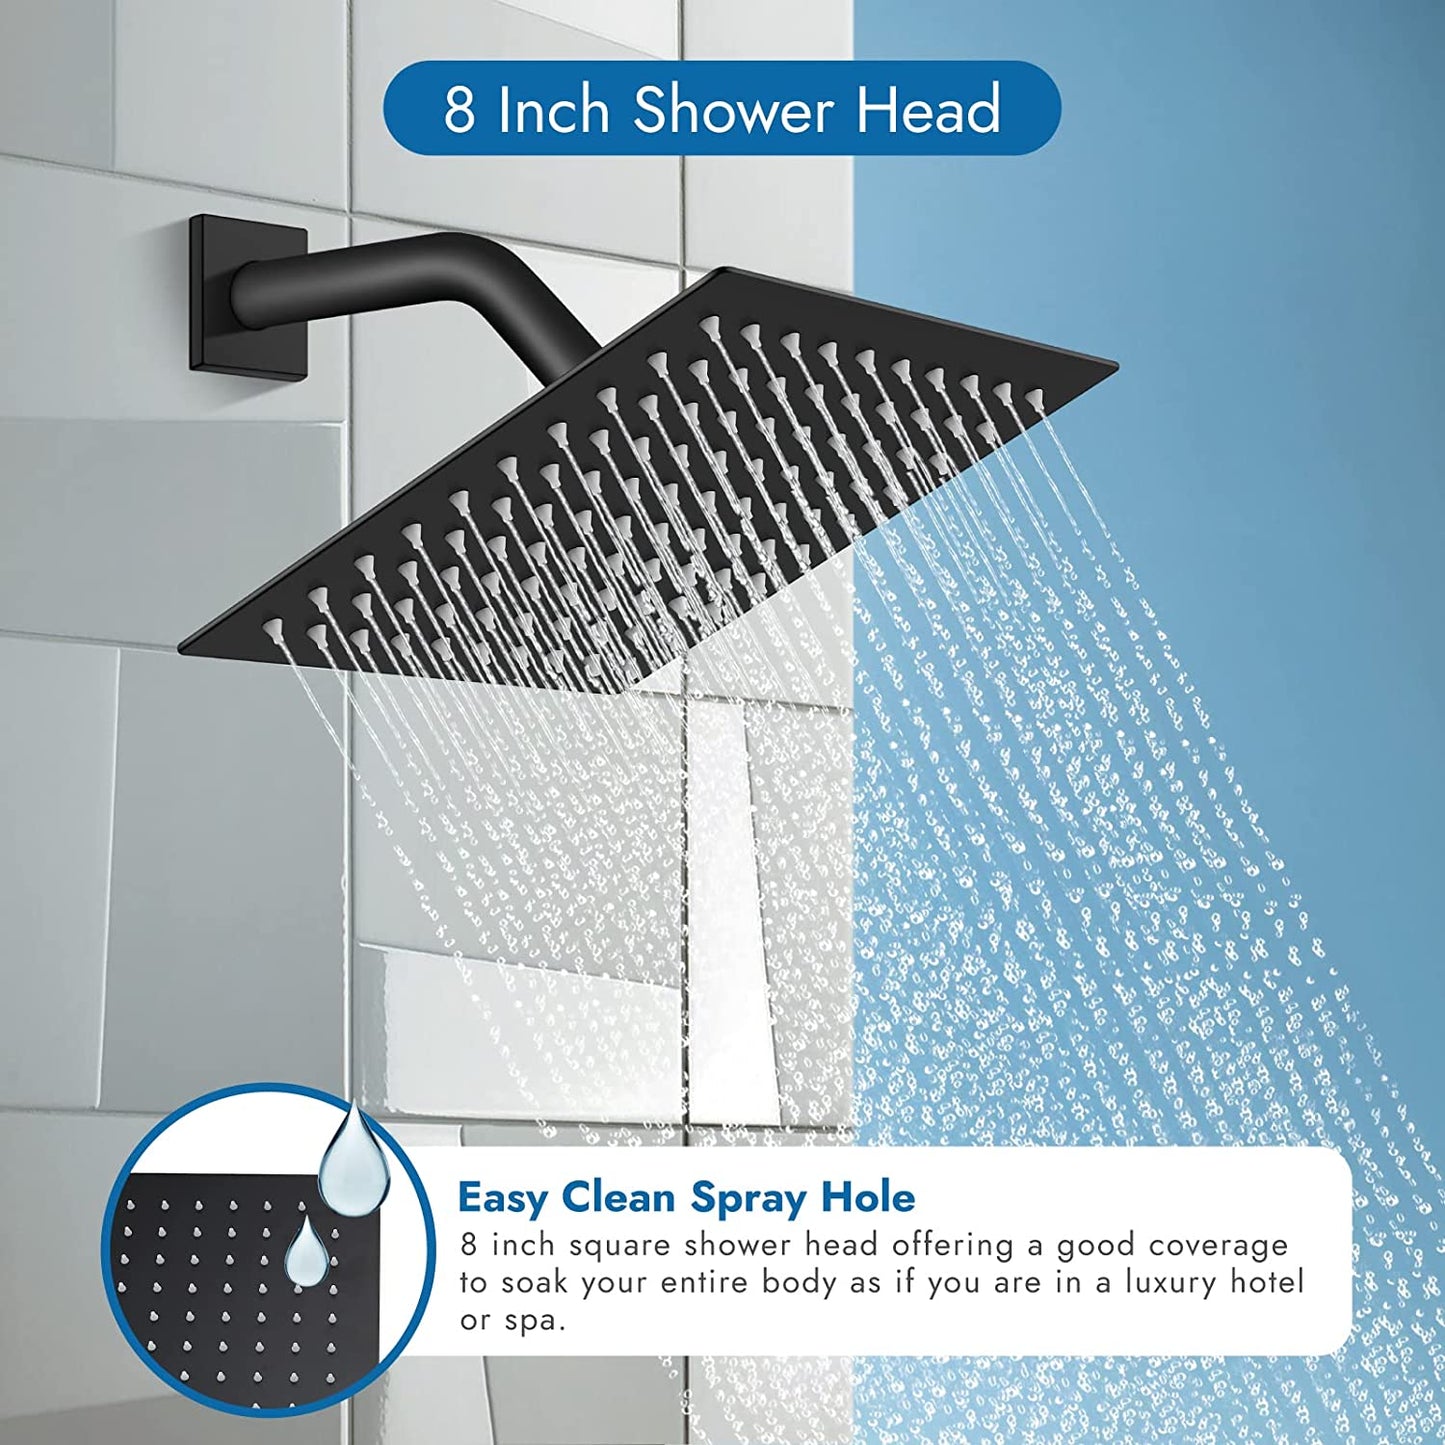 
                  
                    Cinwiny Wall Mounted Rain Shower System with 8 Inch Square Showerhead Bathroom Shower Faucet Set Single Function Single Handle With Rough-in Valve Bathroom Rainfall Shower Trim Kit
                  
                